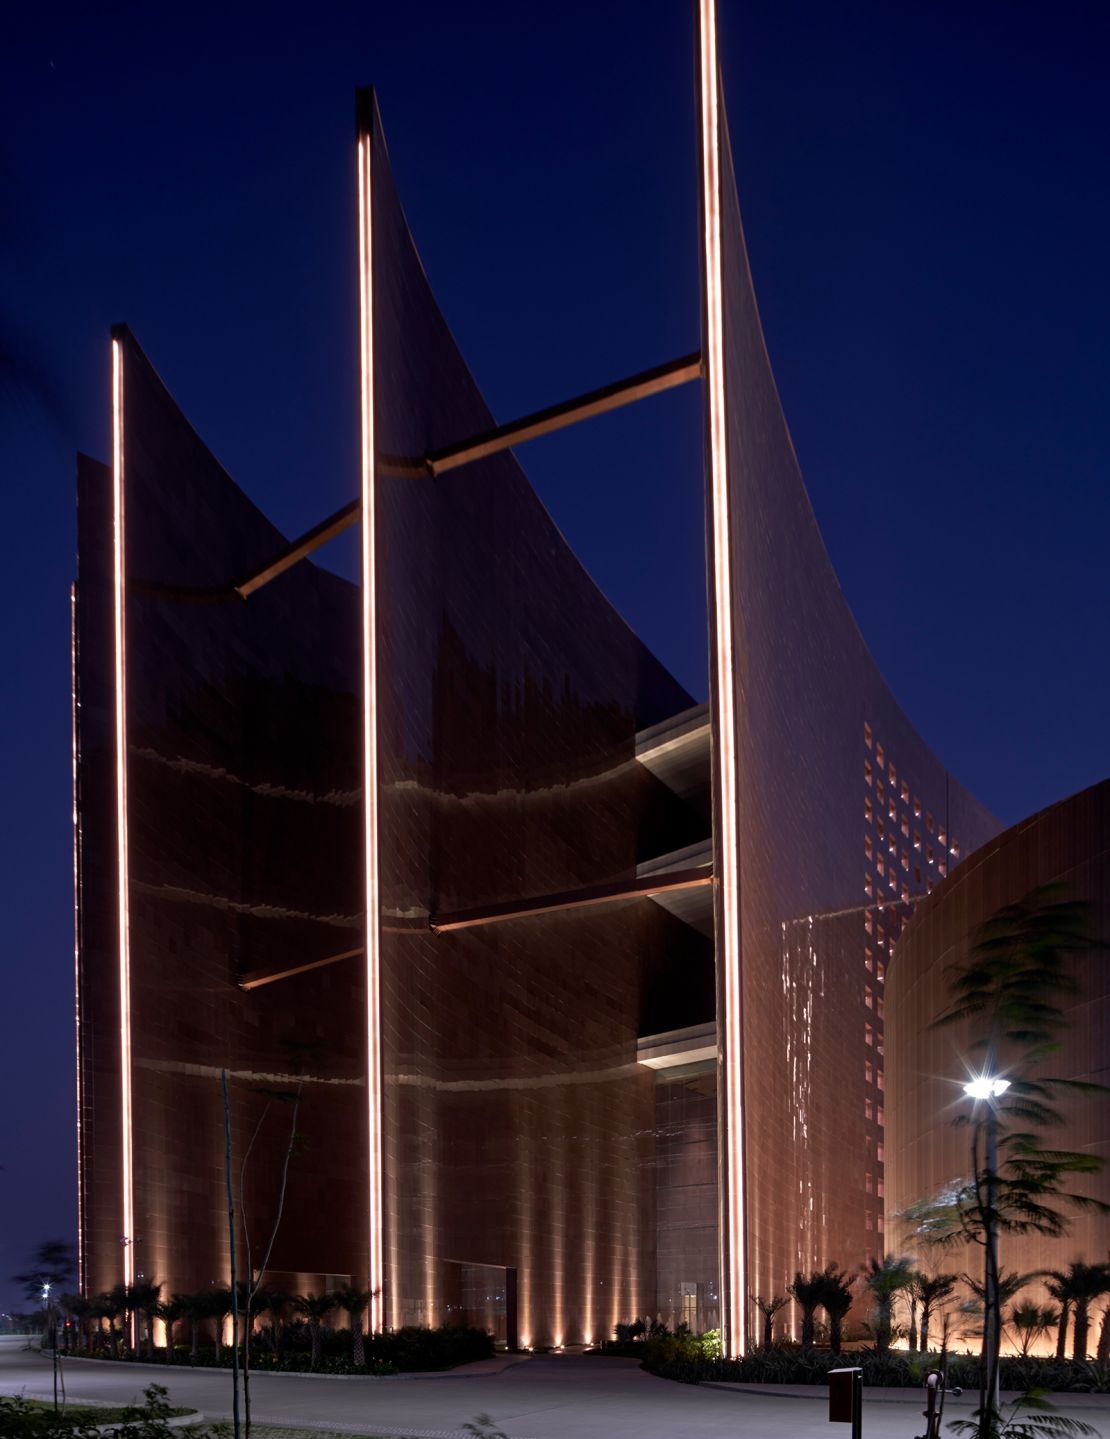 The structure's spine flares out at each end to funnel breeze through the building.